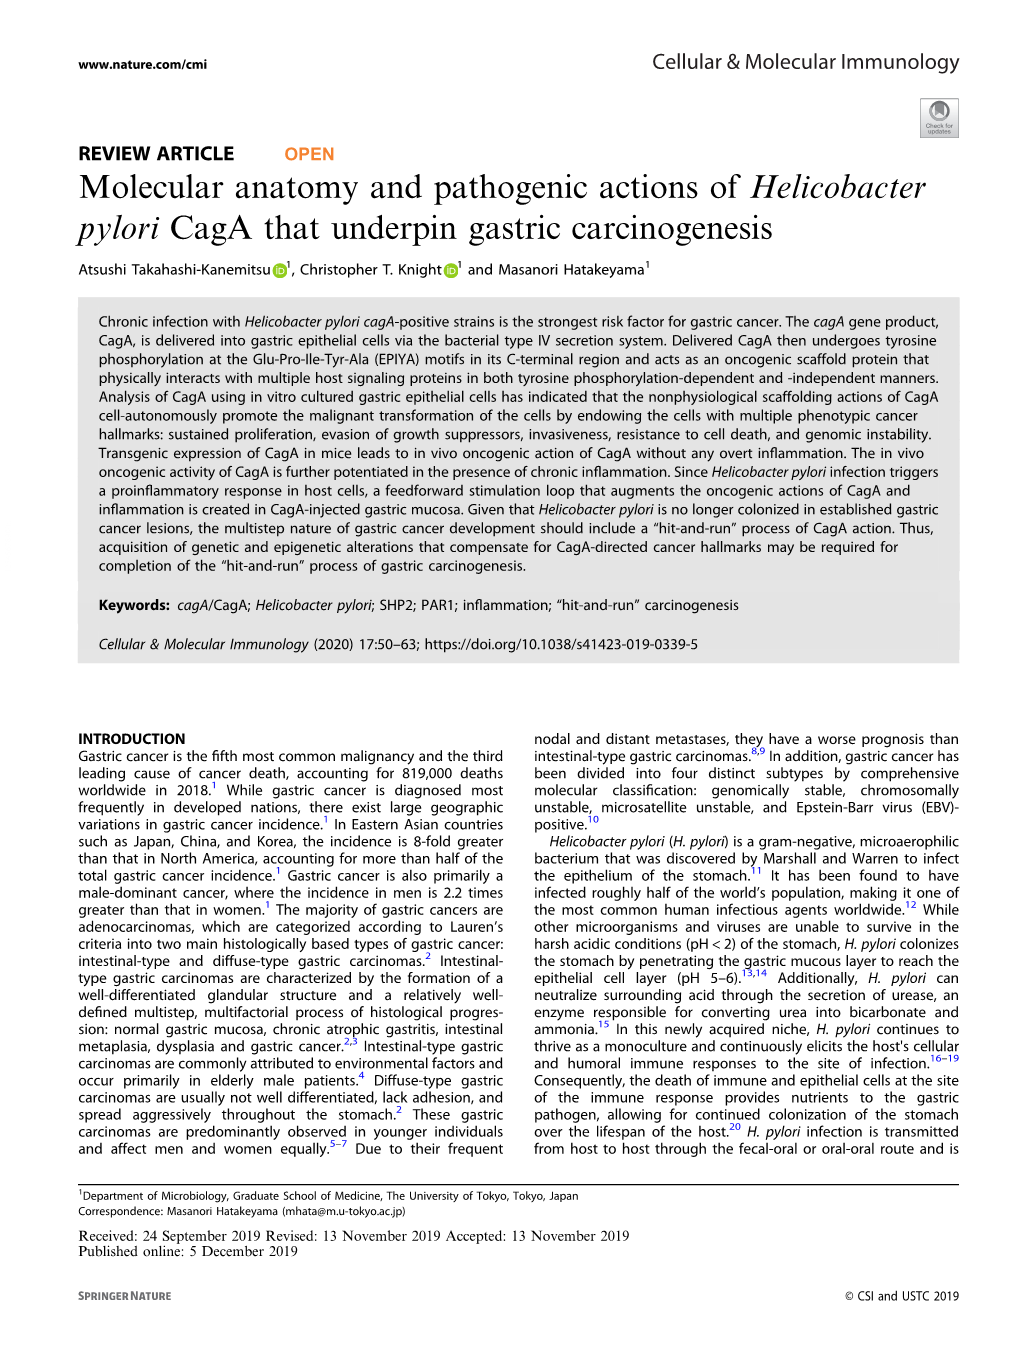 Molecular Anatomy and Pathogenic Actions of Helicobacter Pylori Caga That Underpin Gastric Carcinogenesis